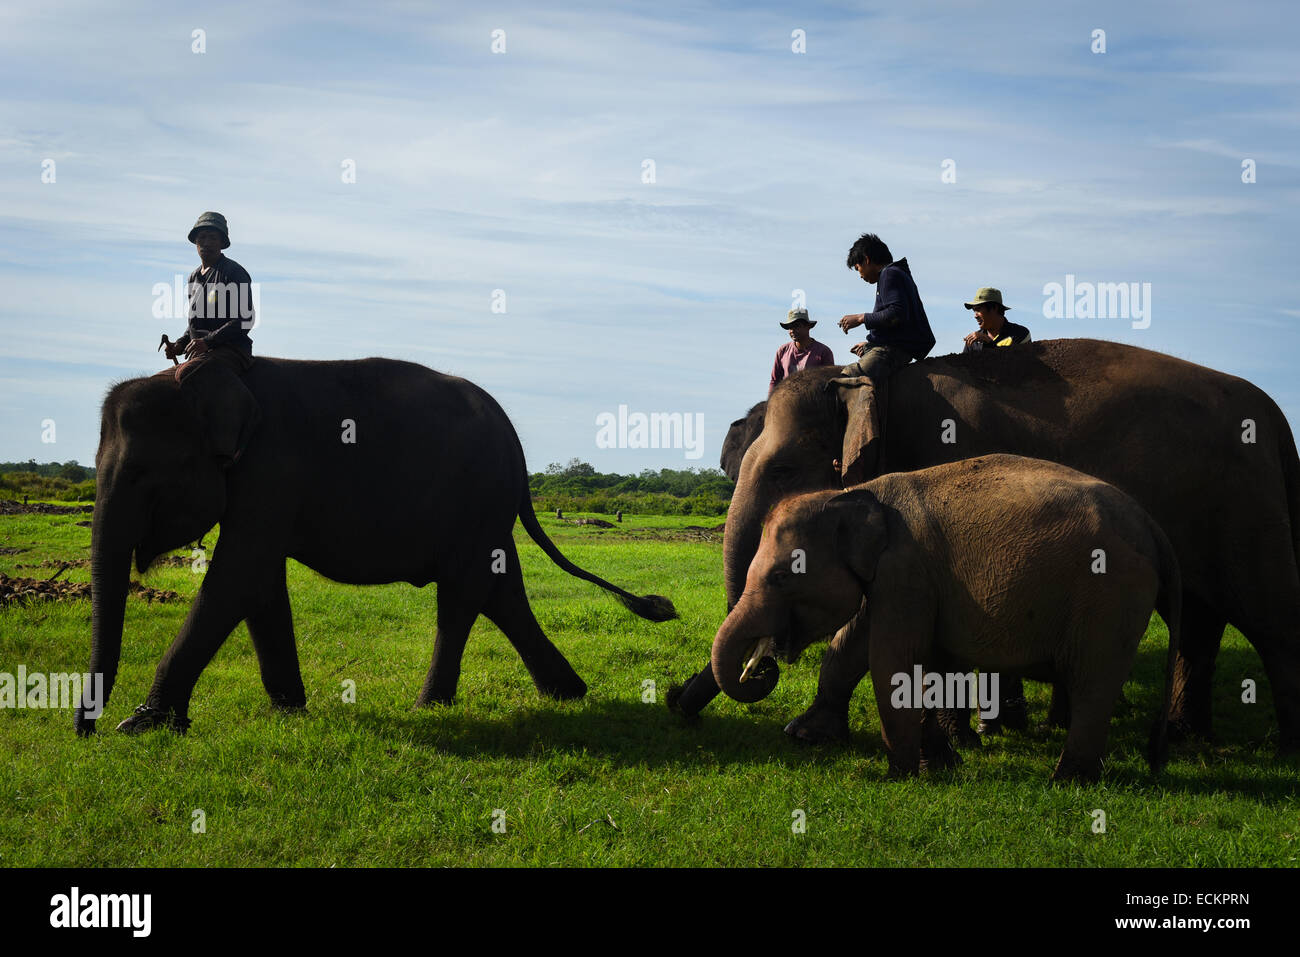 Mahouts take their elephants in the morning to start daily routine in Way Kambas National Park, Indonesia. Stock Photo